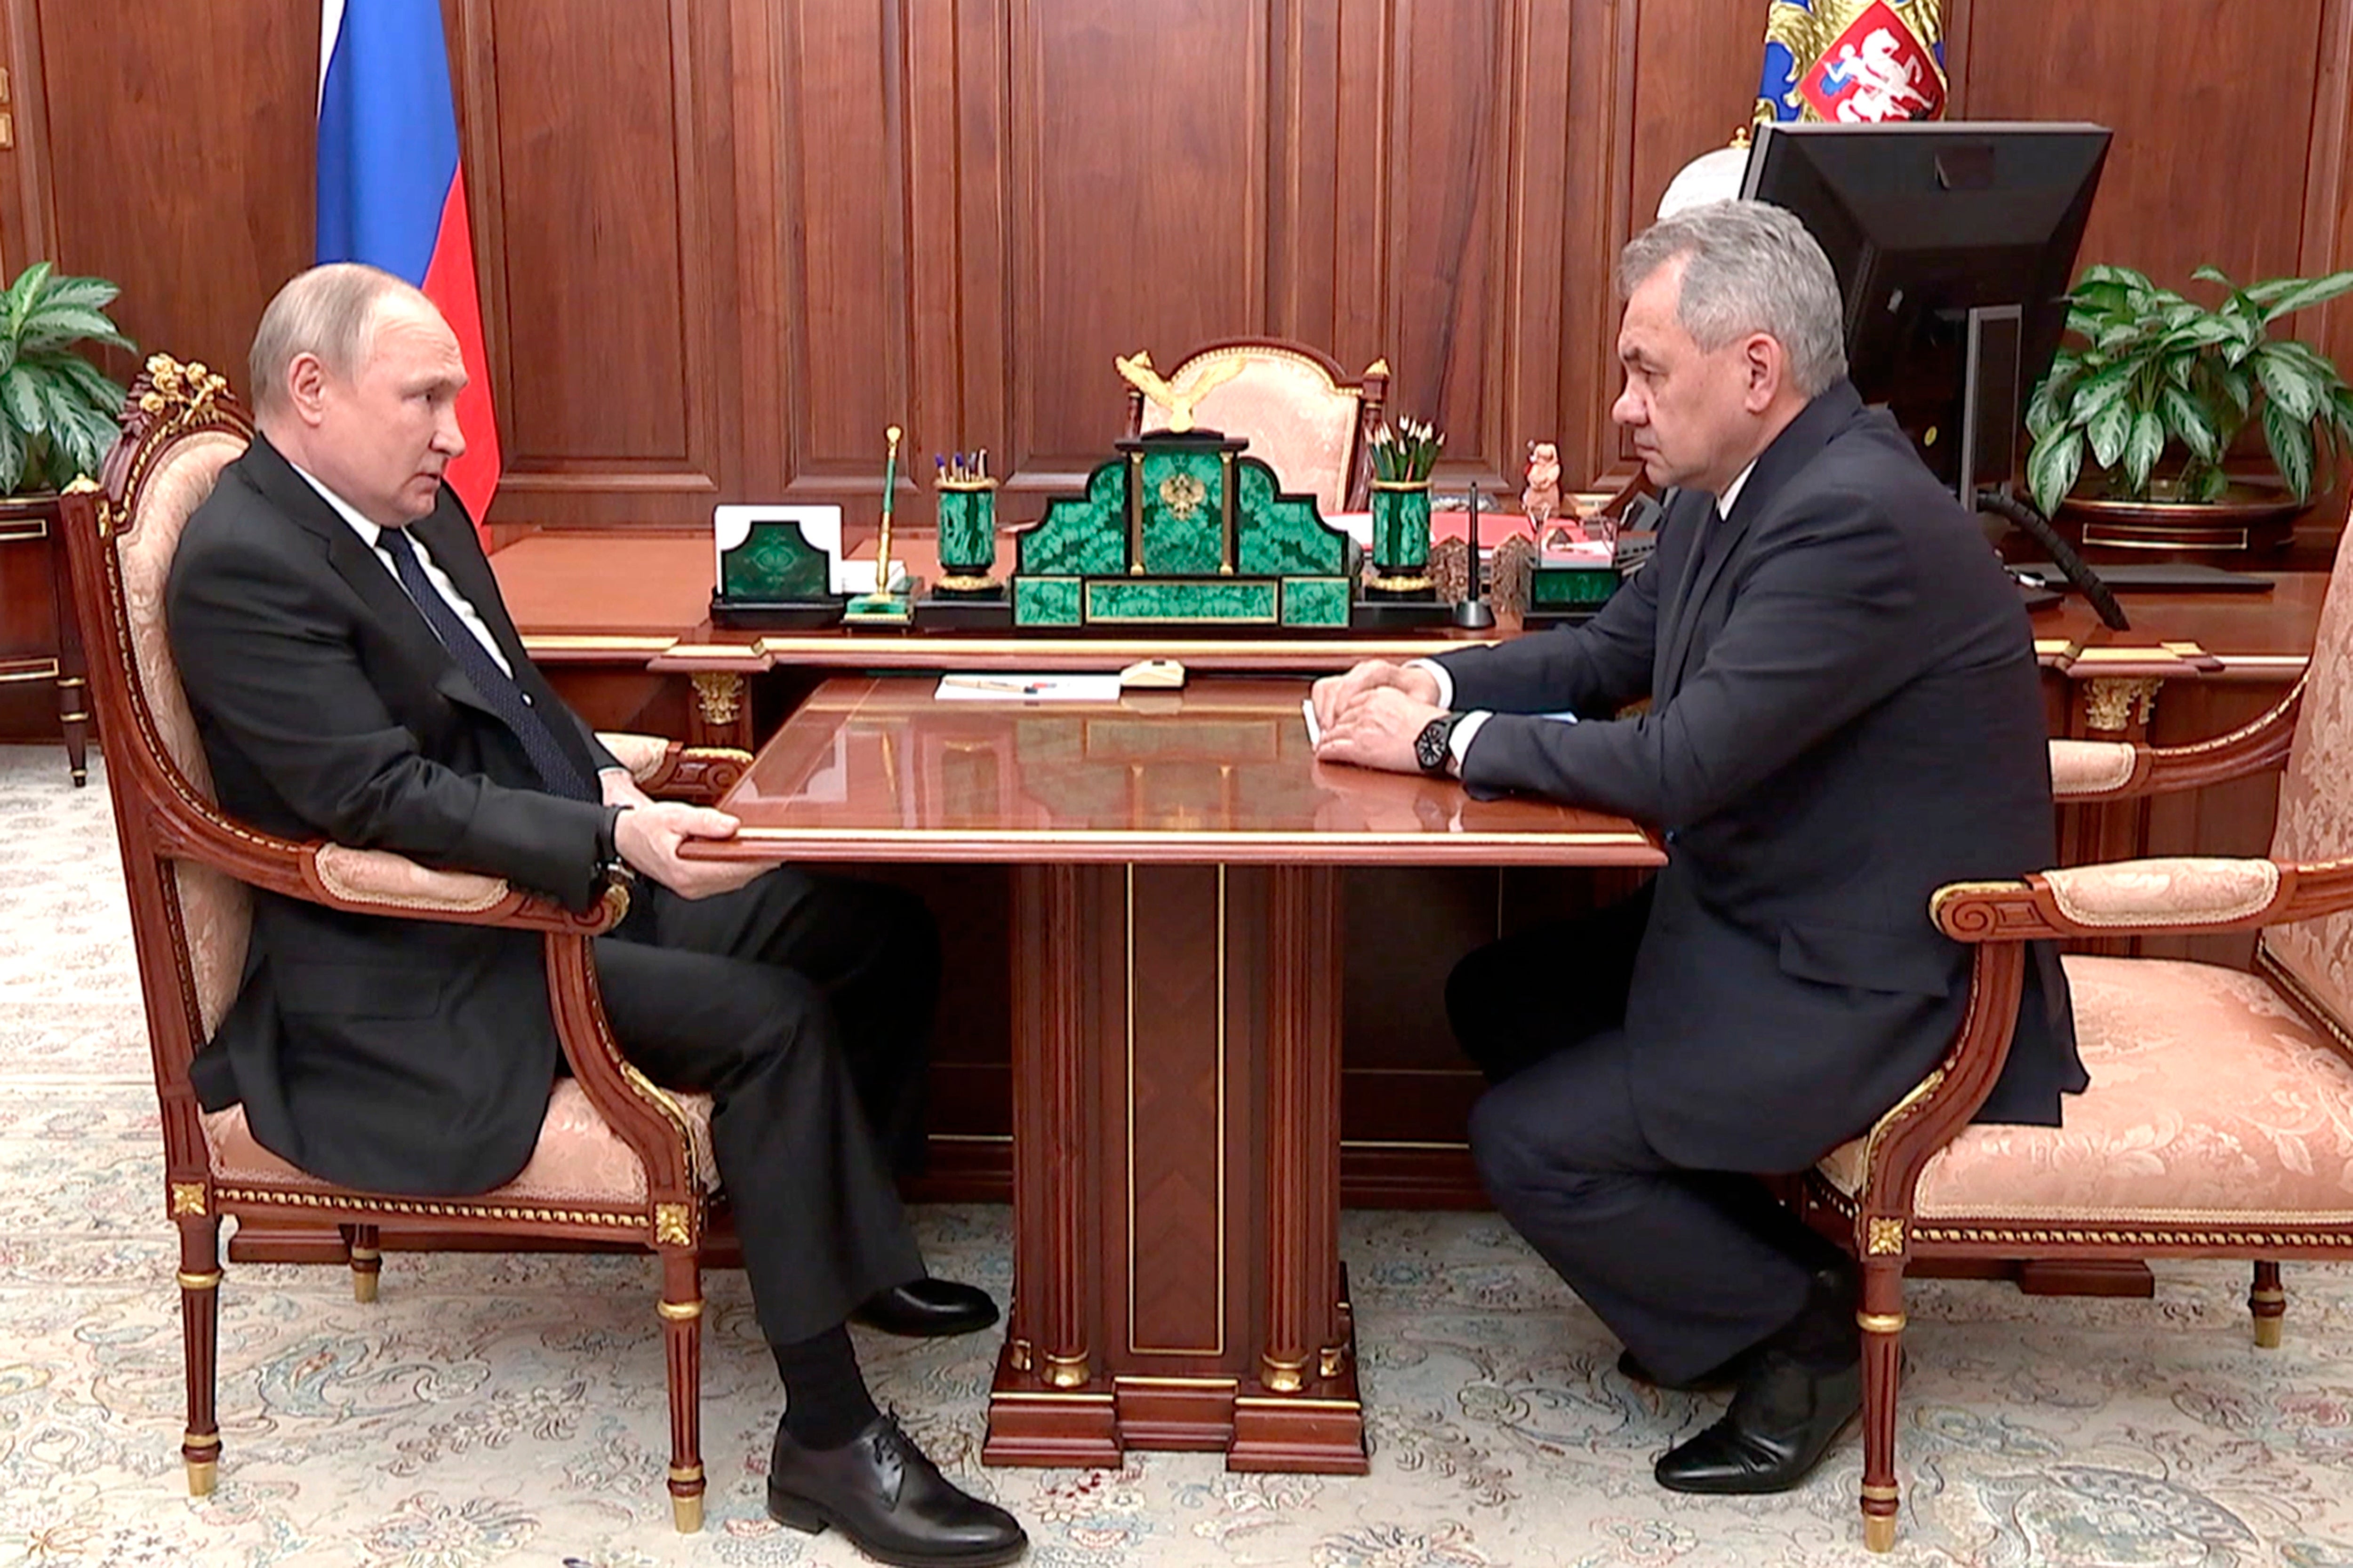 Footage showed Mr Putin holding a table for large portions of a meeting